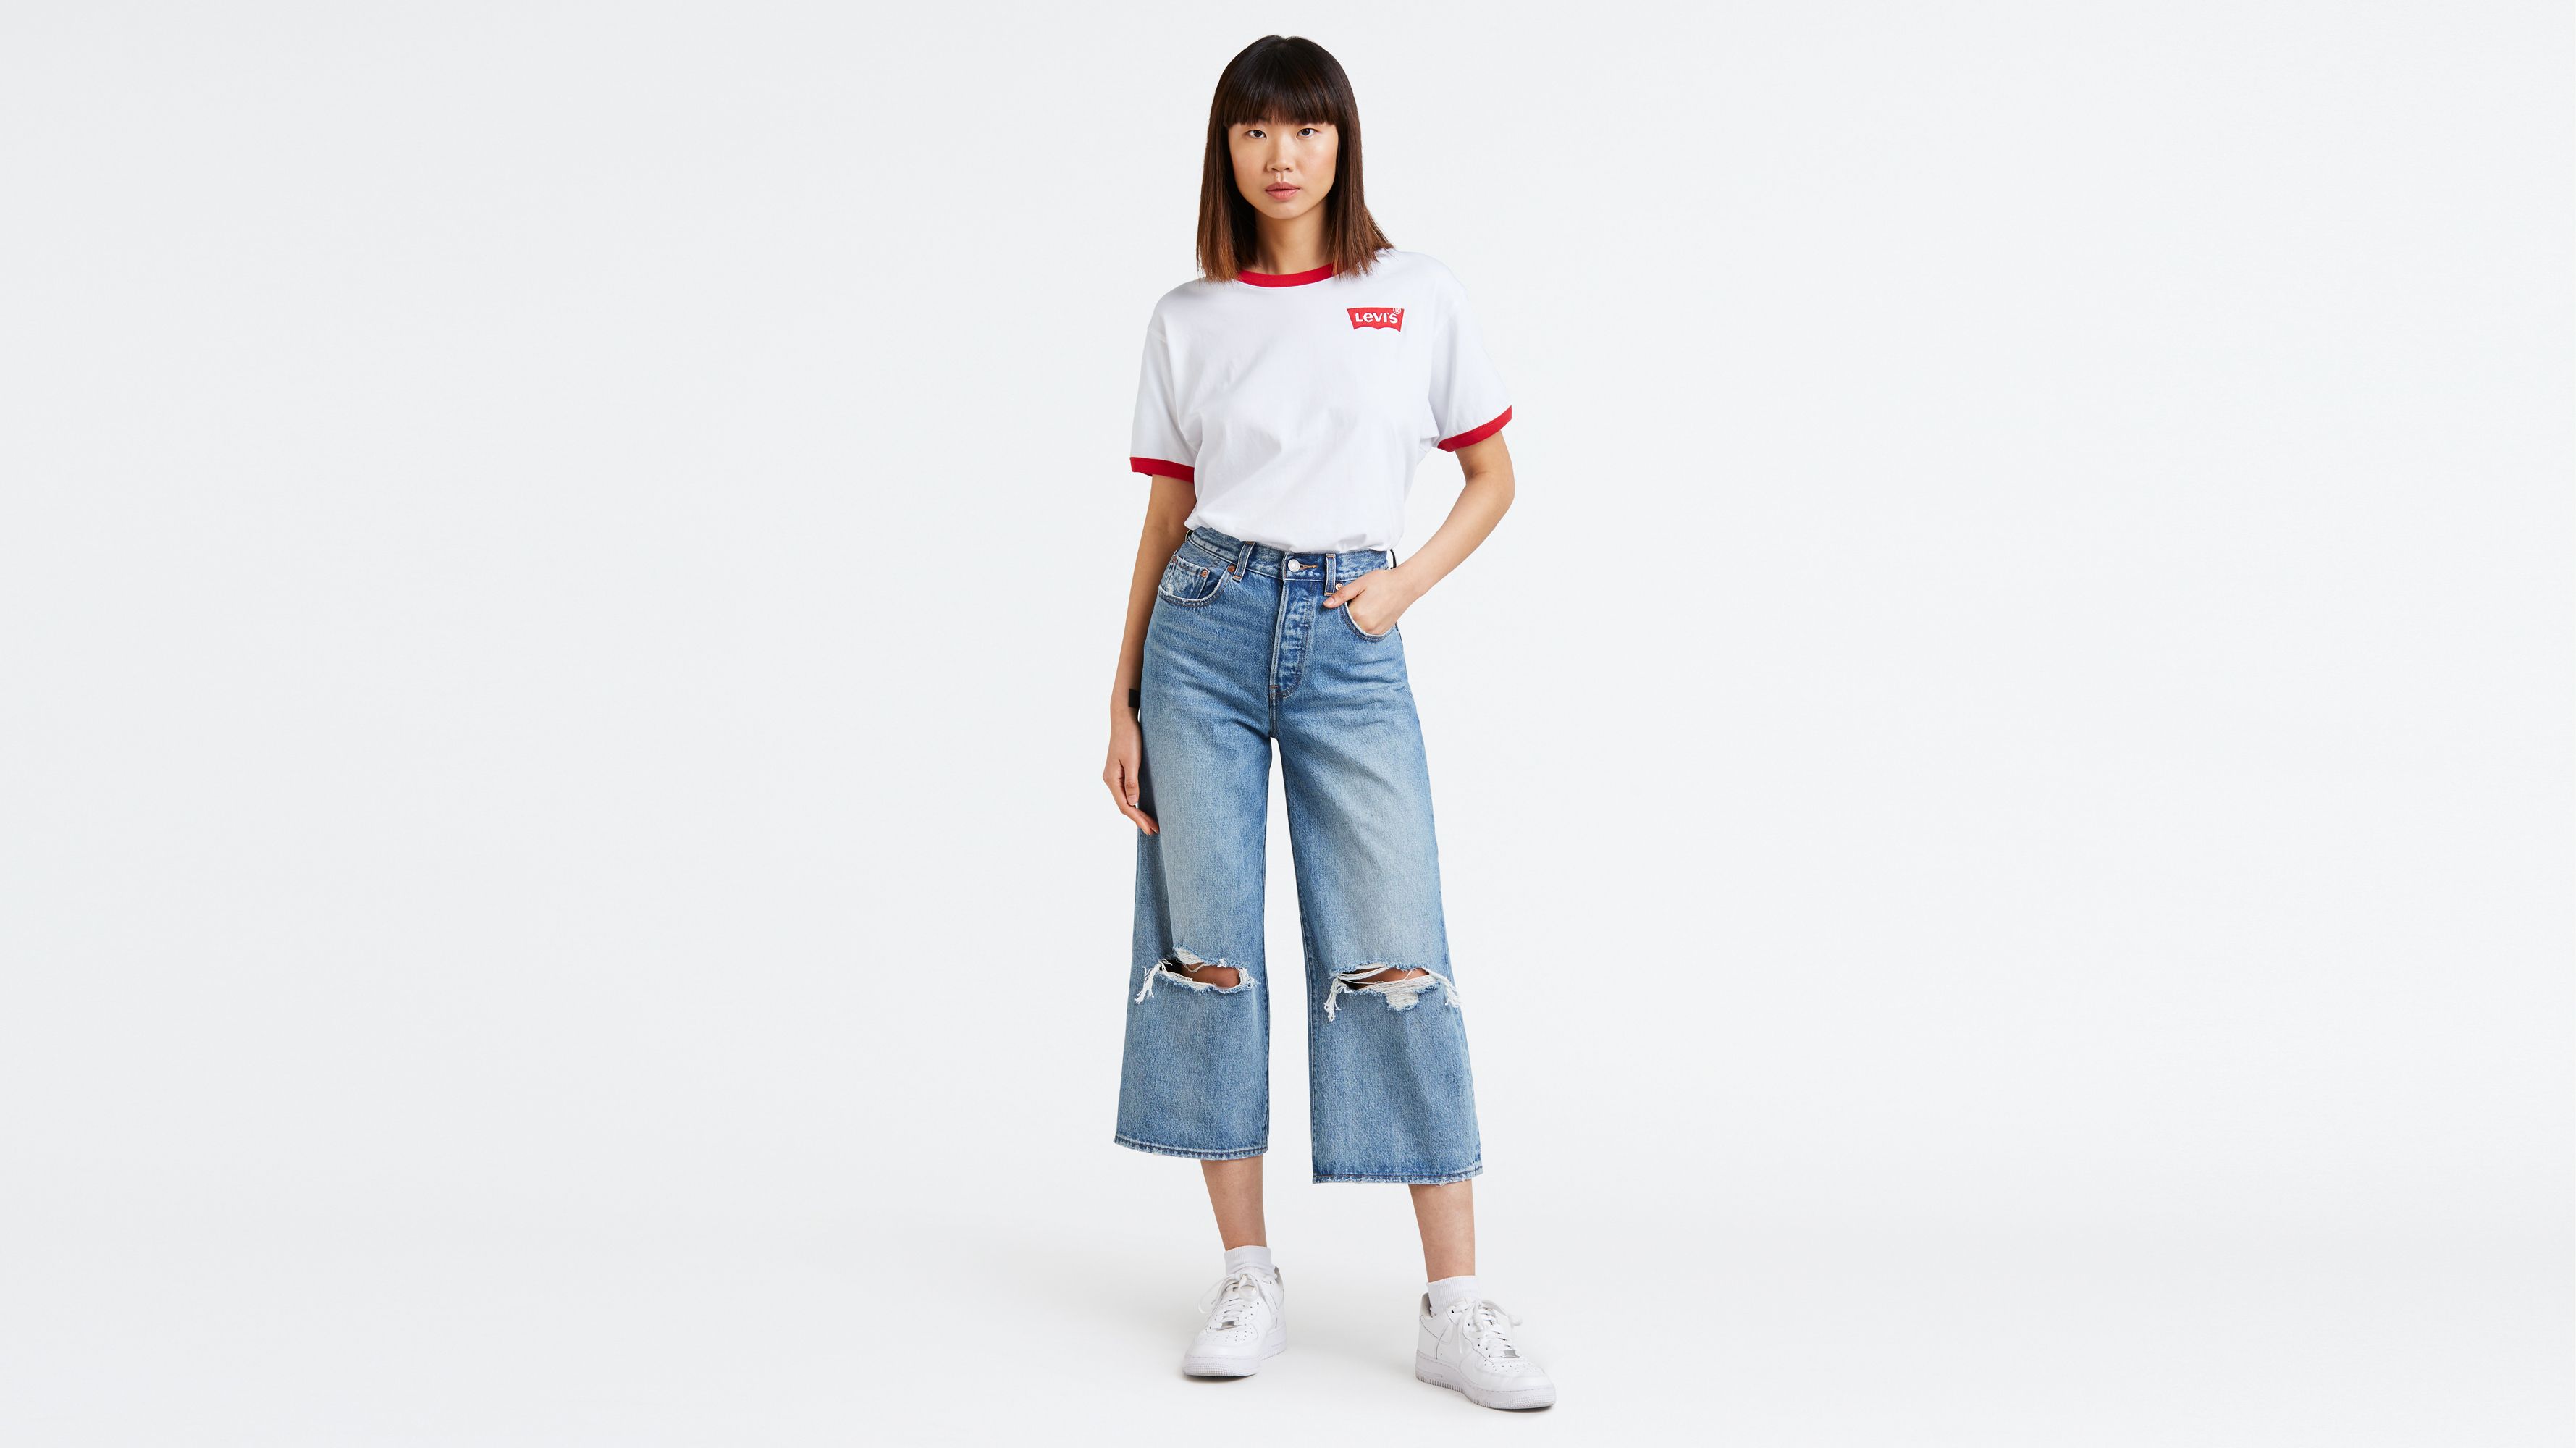 levi's high water wide leg jeans